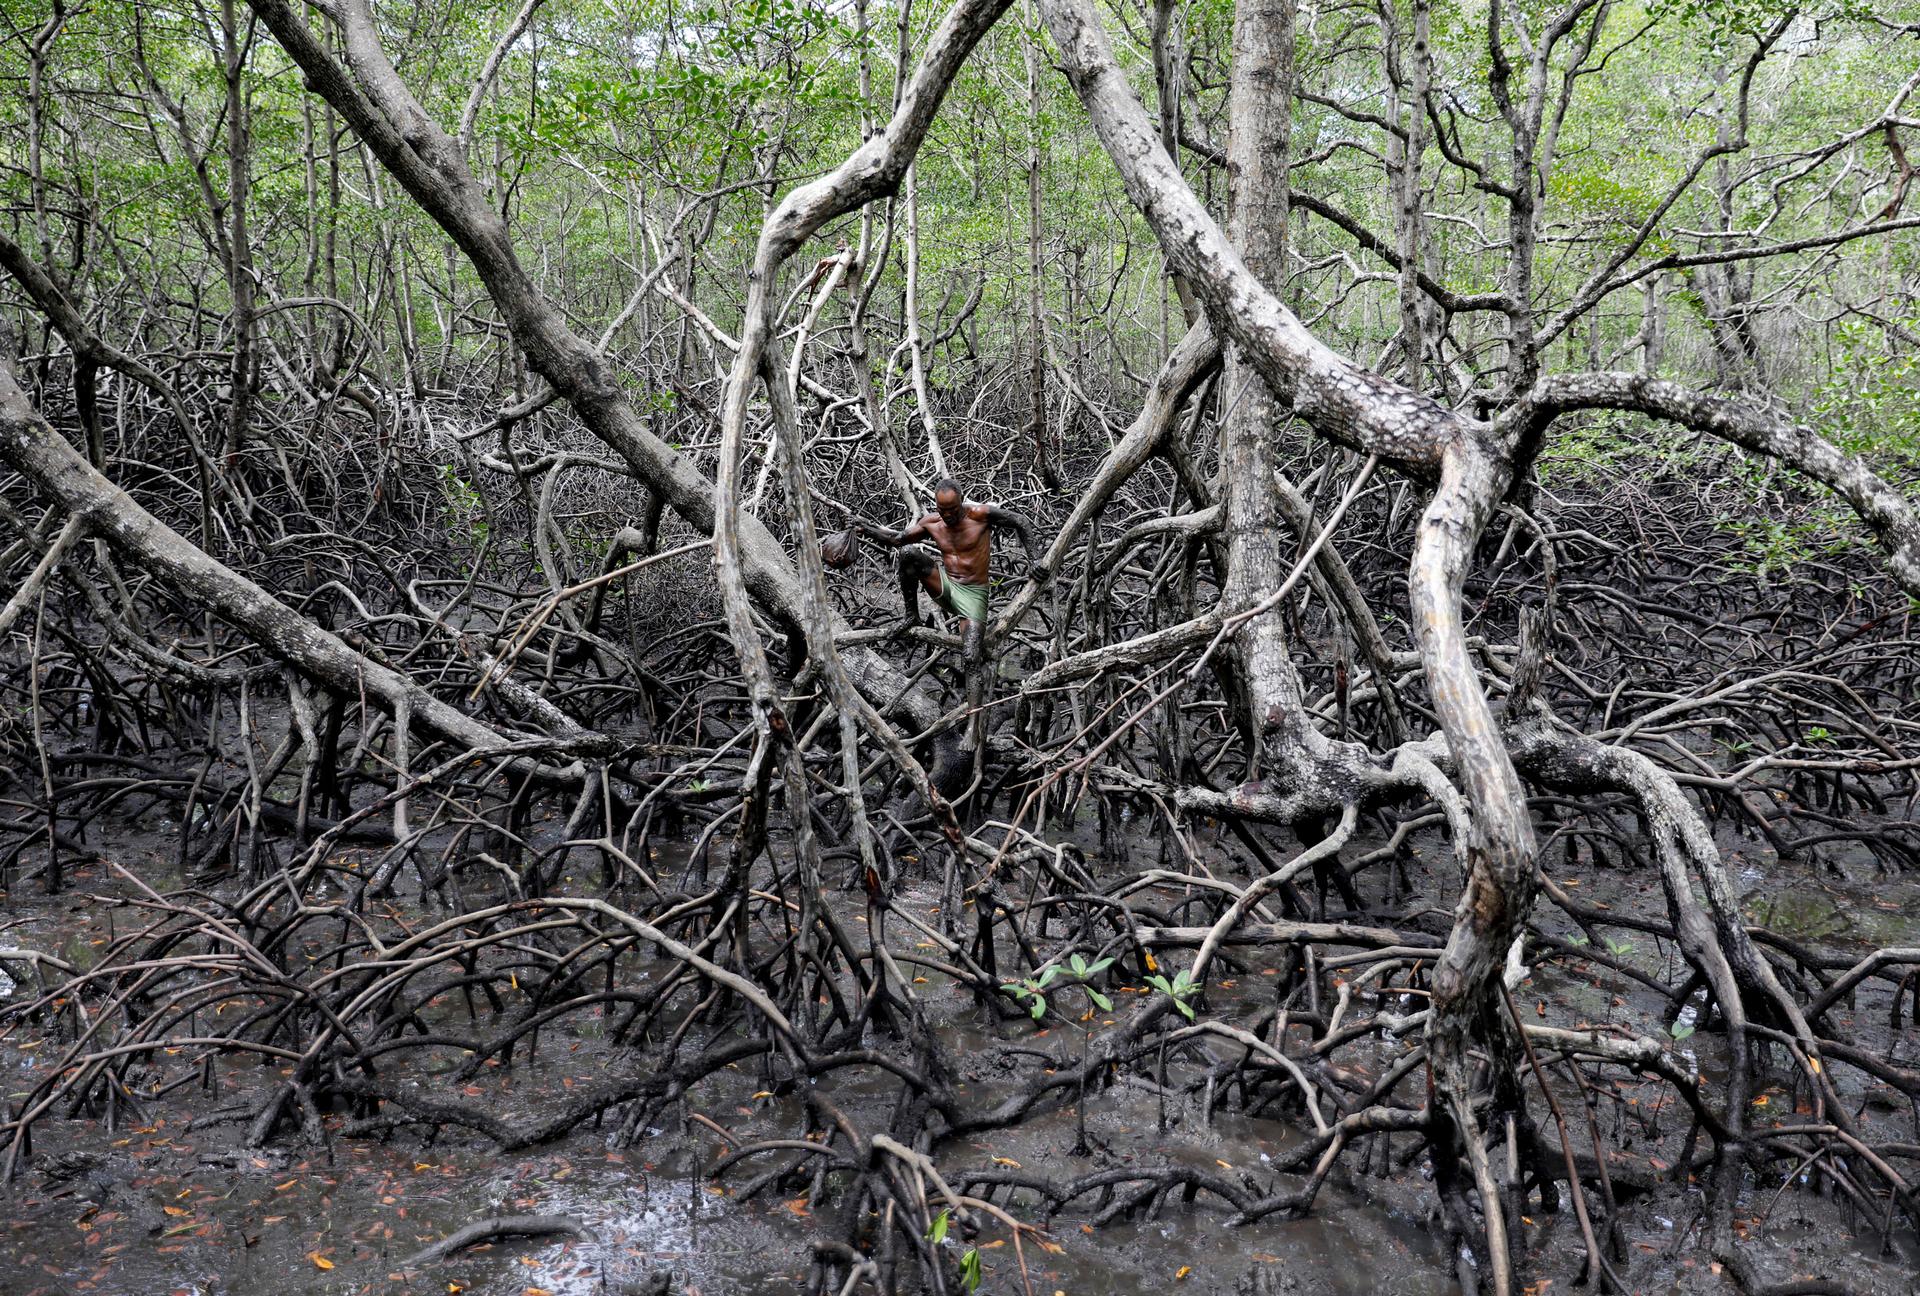 A man is shown walking on the exposed root system of the mangrove forest.